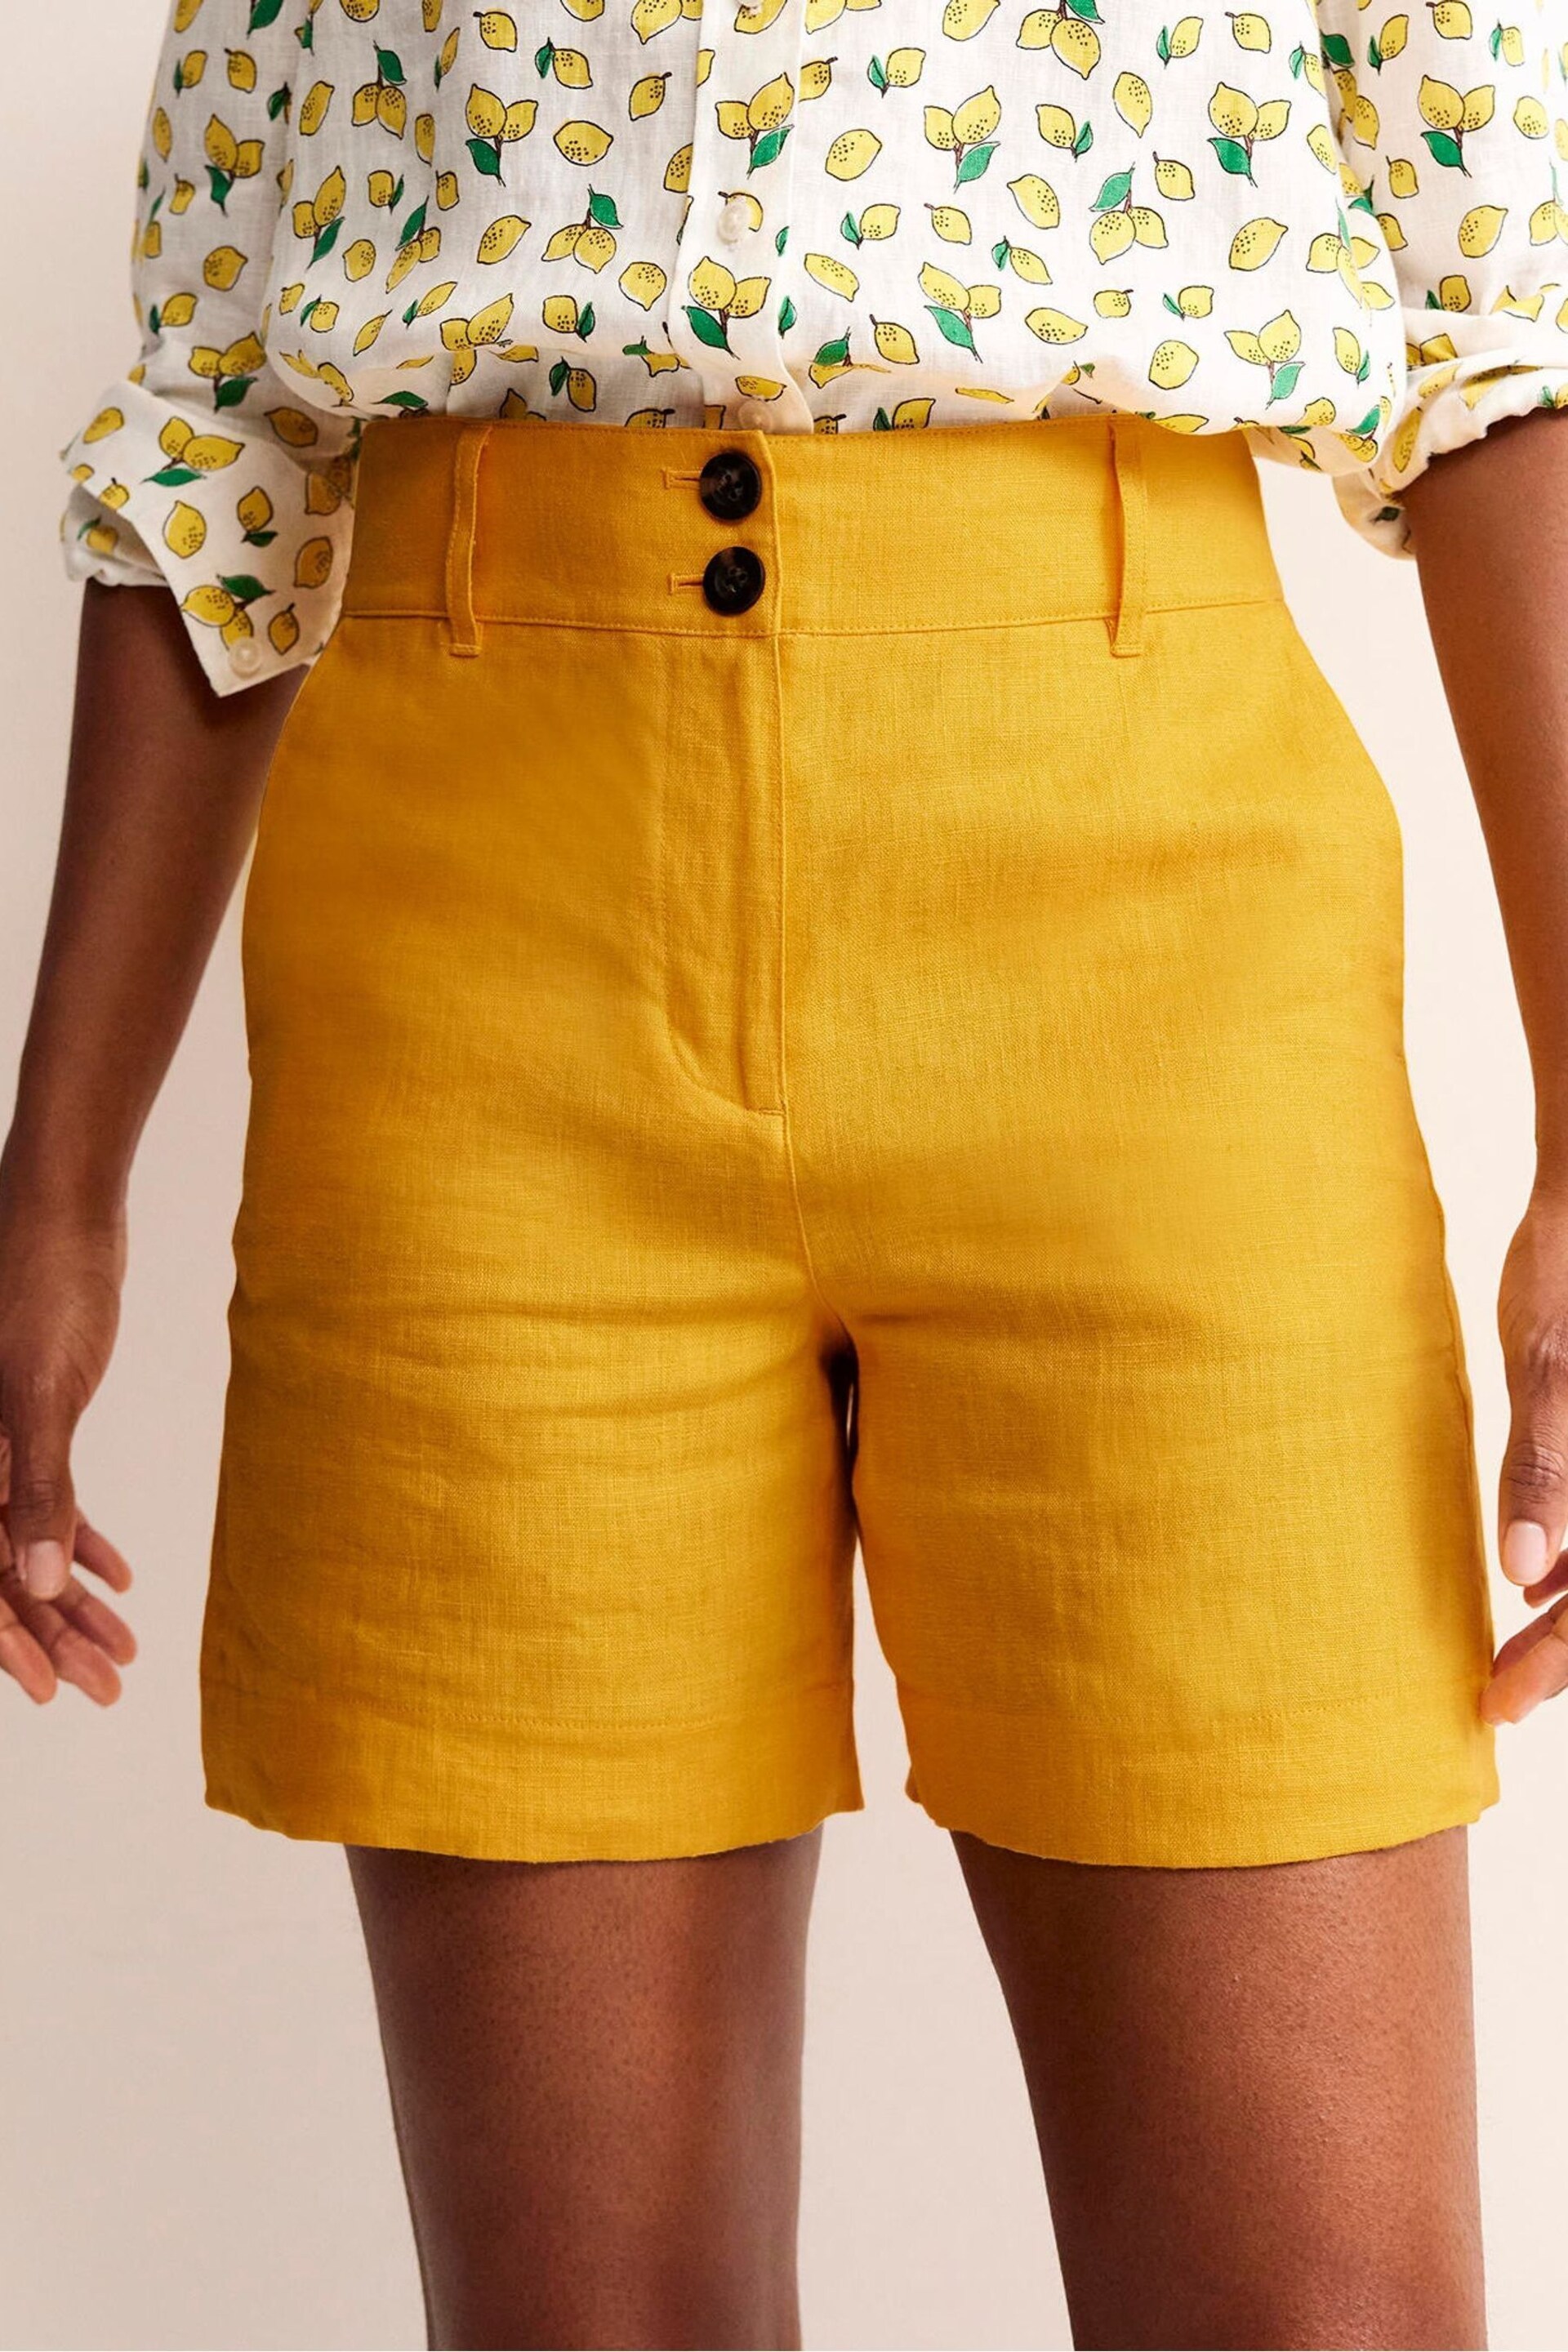 Boden Yellow Petite Westbourne Linen Shorts - Image 4 of 5